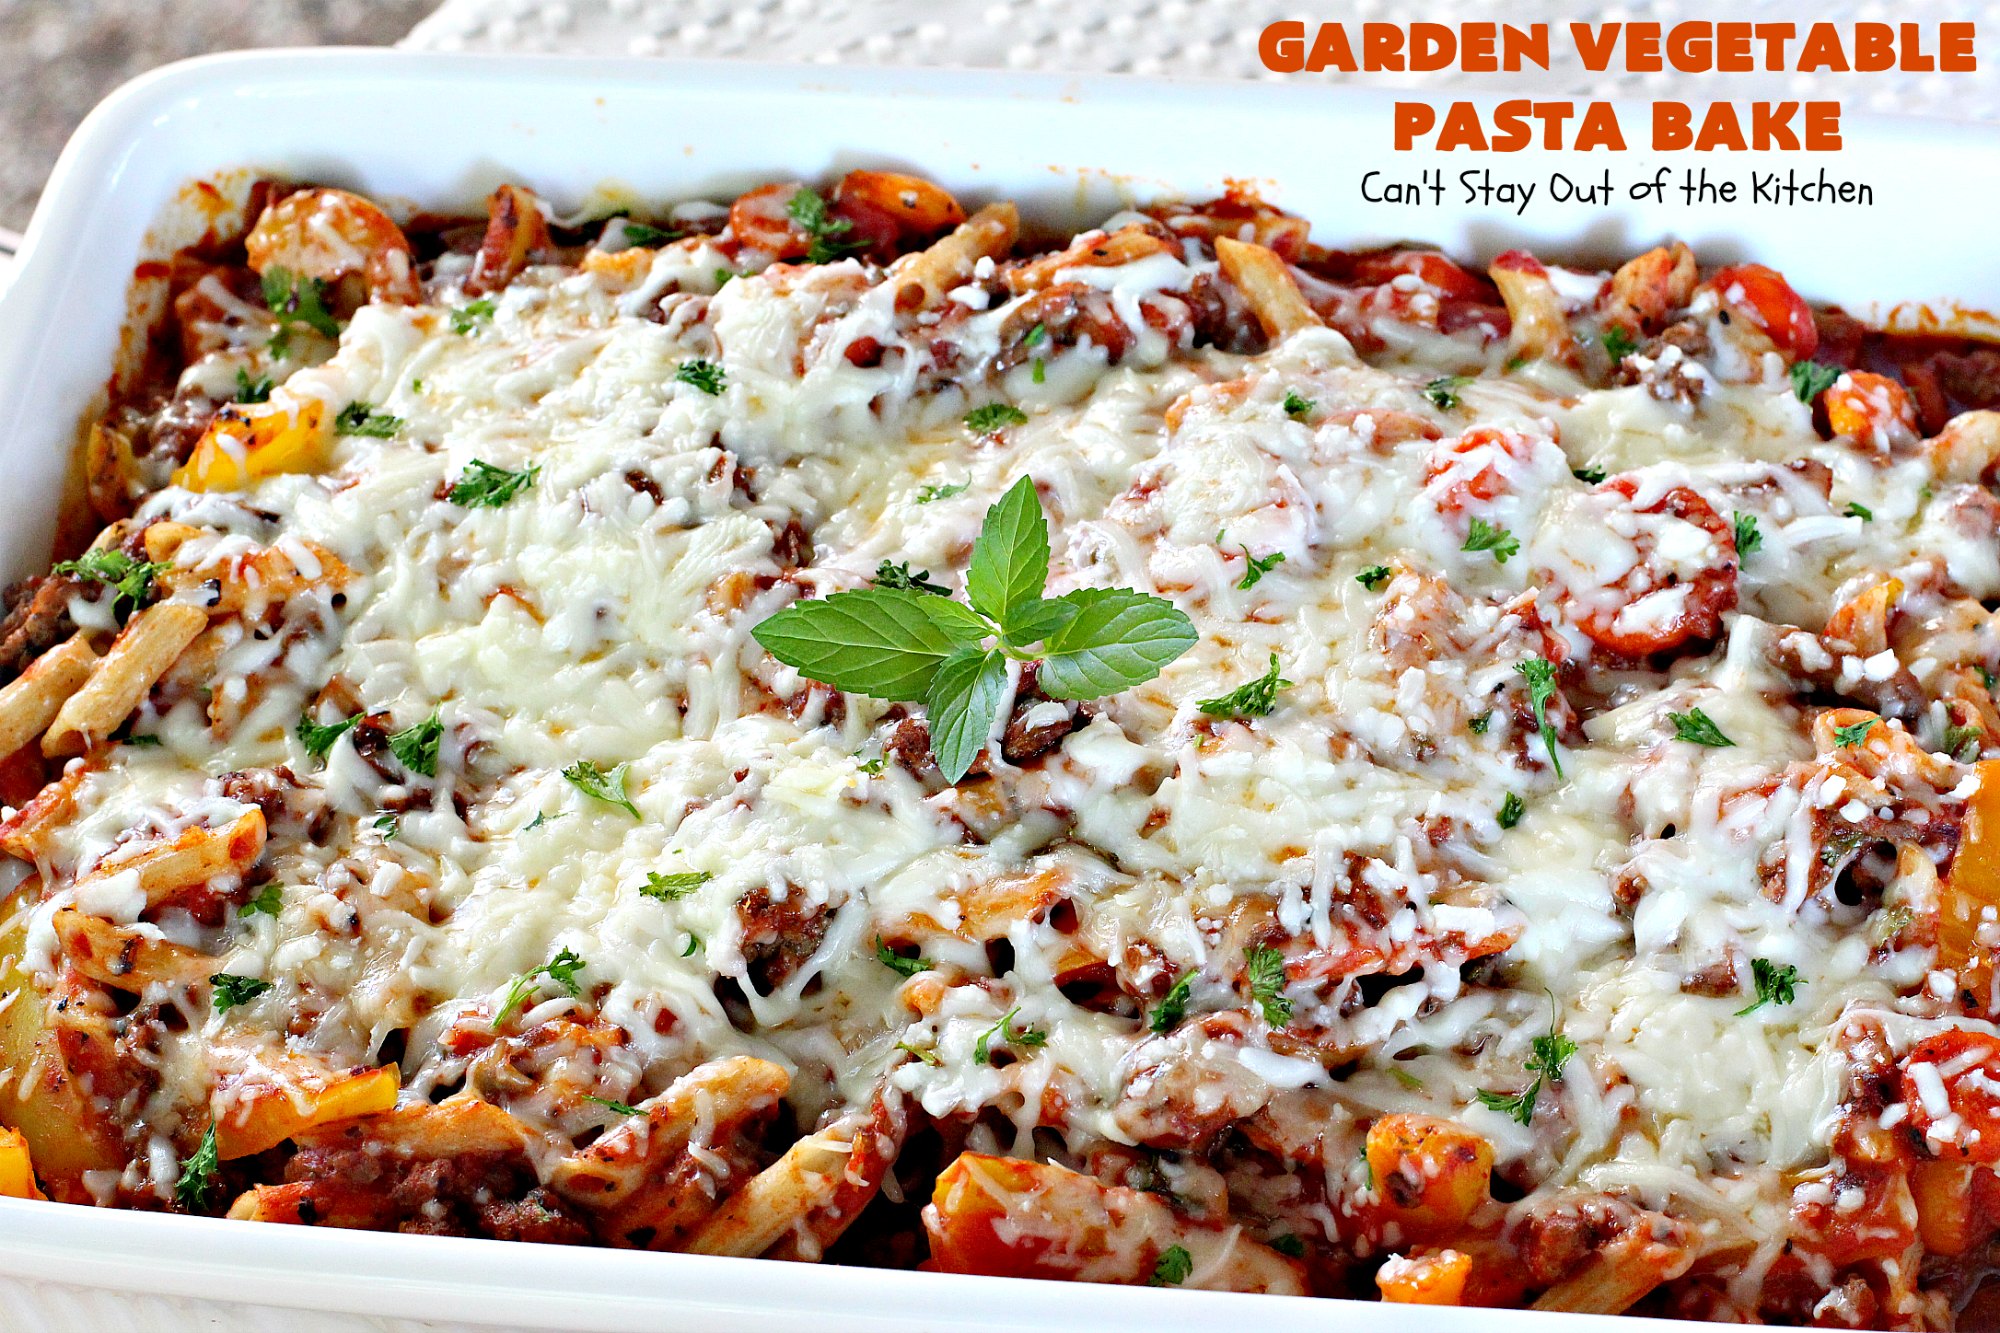 Garden Vegetable Pasta Bake – Can't Stay Out of the Kitchen